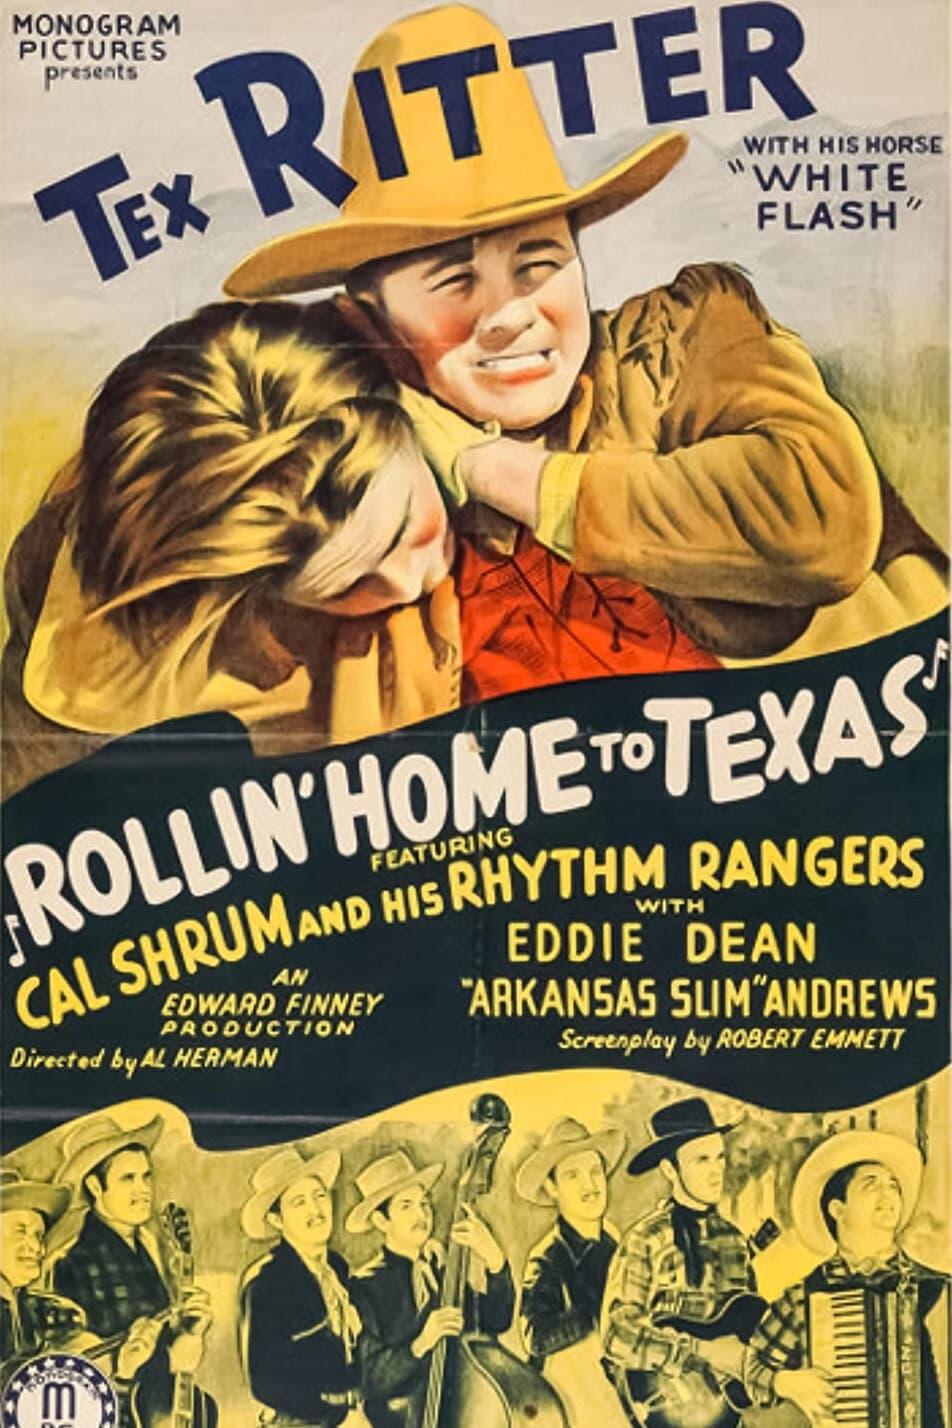 Rollin' Home to Texas poster